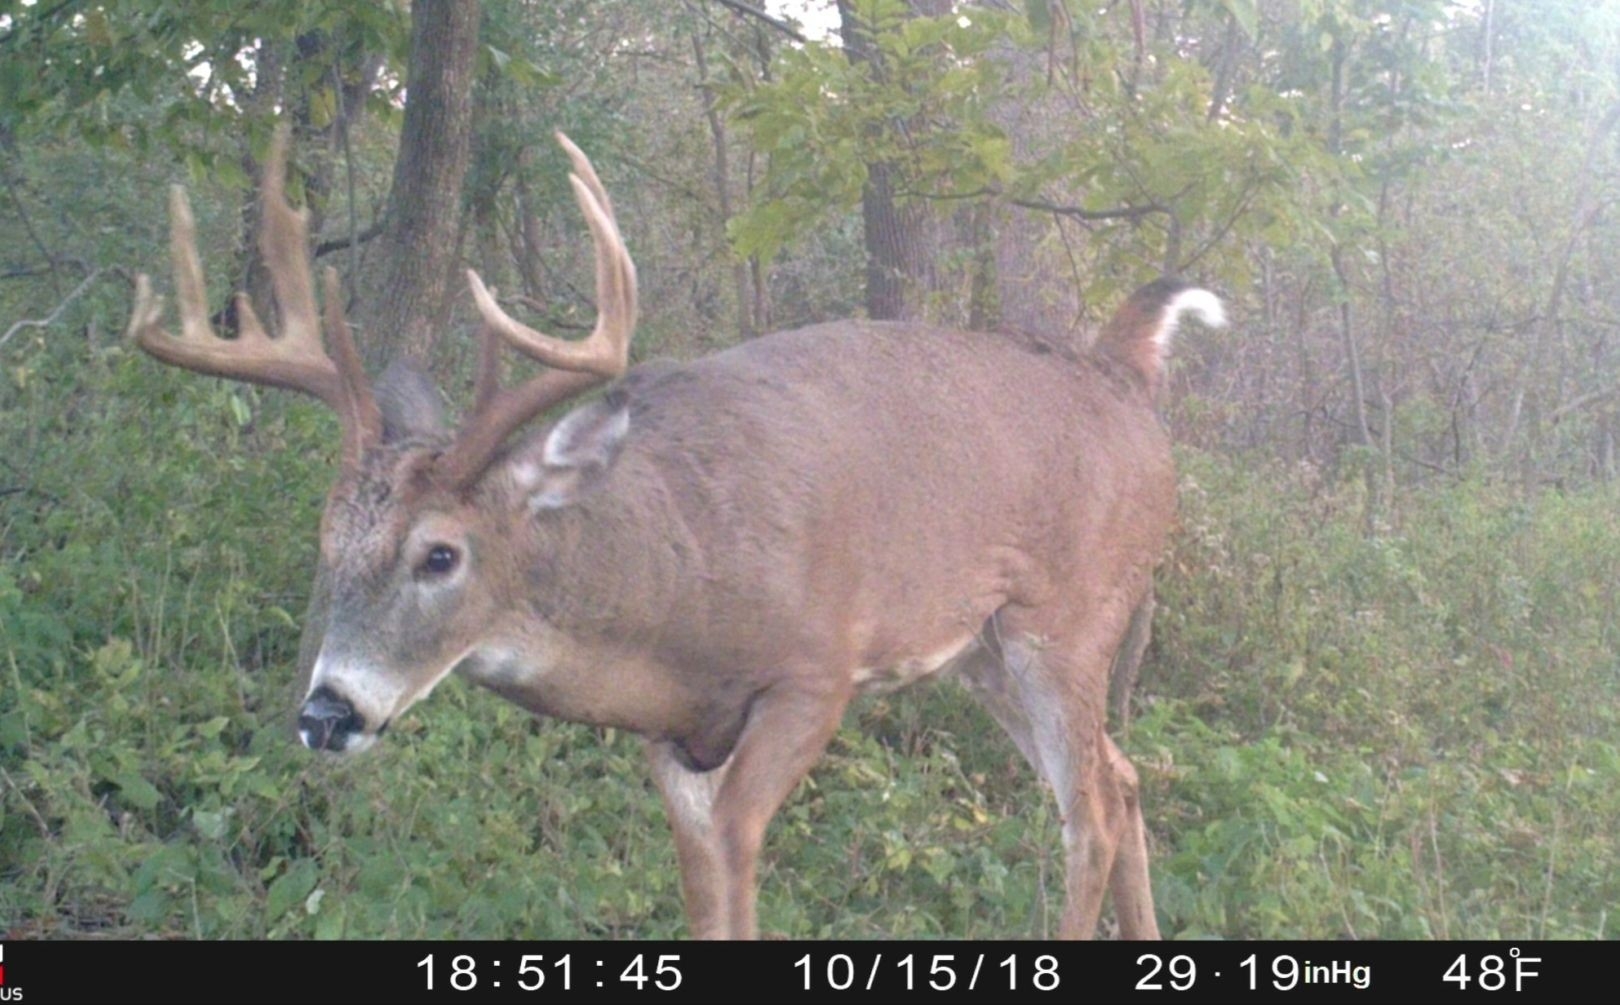 When Will The Whitetail Rut Begin | Whitetail Habitat Solutions  Deer Rut For 2020